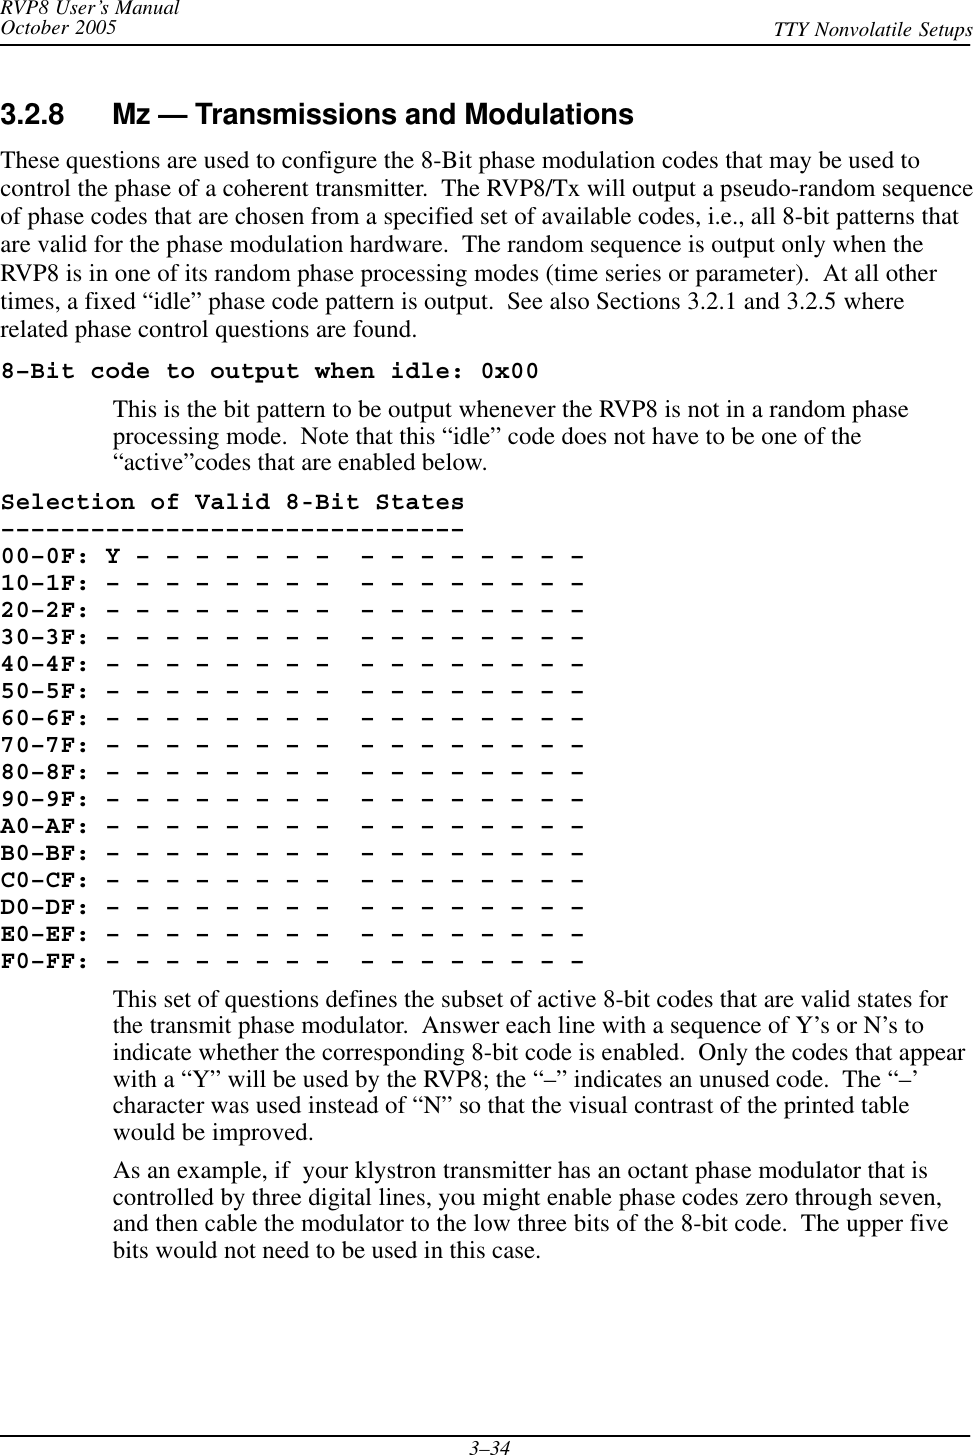 RVP8 User’s ManualOctober 2005 TTY Nonvolatile Setups3–343.2.8 Mz — Transmissions and ModulationsThese questions are used to configure the 8-Bit phase modulation codes that may be used tocontrol the phase of a coherent transmitter.  The RVP8/Tx will output a pseudo-random sequenceof phase codes that are chosen from a specified set of available codes, i.e., all 8-bit patterns thatare valid for the phase modulation hardware.  The random sequence is output only when theRVP8 is in one of its random phase processing modes (time series or parameter).  At all othertimes, a fixed “idle” phase code pattern is output.  See also Sections 3.2.1 and 3.2.5 whererelated phase control questions are found.8–Bit code to output when idle: 0x00This is the bit pattern to be output whenever the RVP8 is not in a random phaseprocessing mode.  Note that this “idle” code does not have to be one of the“active”codes that are enabled below.Selection of Valid 8-Bit States–––––––––––––––––––––––––––––––00–0F: Y – – – – – – –  – – – – – – – – 10–1F: – – – – – – – –  – – – – – – – – 20–2F: – – – – – – – –  – – – – – – – – 30–3F: – – – – – – – –  – – – – – – – – 40–4F: – – – – – – – –  – – – – – – – – 50–5F: – – – – – – – –  – – – – – – – – 60–6F: – – – – – – – –  – – – – – – – – 70–7F: – – – – – – – –  – – – – – – – – 80–8F: – – – – – – – –  – – – – – – – – 90–9F: – – – – – – – –  – – – – – – – – A0–AF: – – – – – – – –  – – – – – – – – B0–BF: – – – – – – – –  – – – – – – – – C0–CF: – – – – – – – –  – – – – – – – – D0–DF: – – – – – – – –  – – – – – – – – E0–EF: – – – – – – – –  – – – – – – – – F0–FF: – – – – – – – –  – – – – – – – –This set of questions defines the subset of active 8-bit codes that are valid states forthe transmit phase modulator.  Answer each line with a sequence of Y’s or N’s toindicate whether the corresponding 8-bit code is enabled.  Only the codes that appearwith a “Y” will be used by the RVP8; the “–” indicates an unused code.  The “–’character was used instead of “N” so that the visual contrast of the printed tablewould be improved.As an example, if  your klystron transmitter has an octant phase modulator that iscontrolled by three digital lines, you might enable phase codes zero through seven,and then cable the modulator to the low three bits of the 8-bit code.  The upper fivebits would not need to be used in this case.